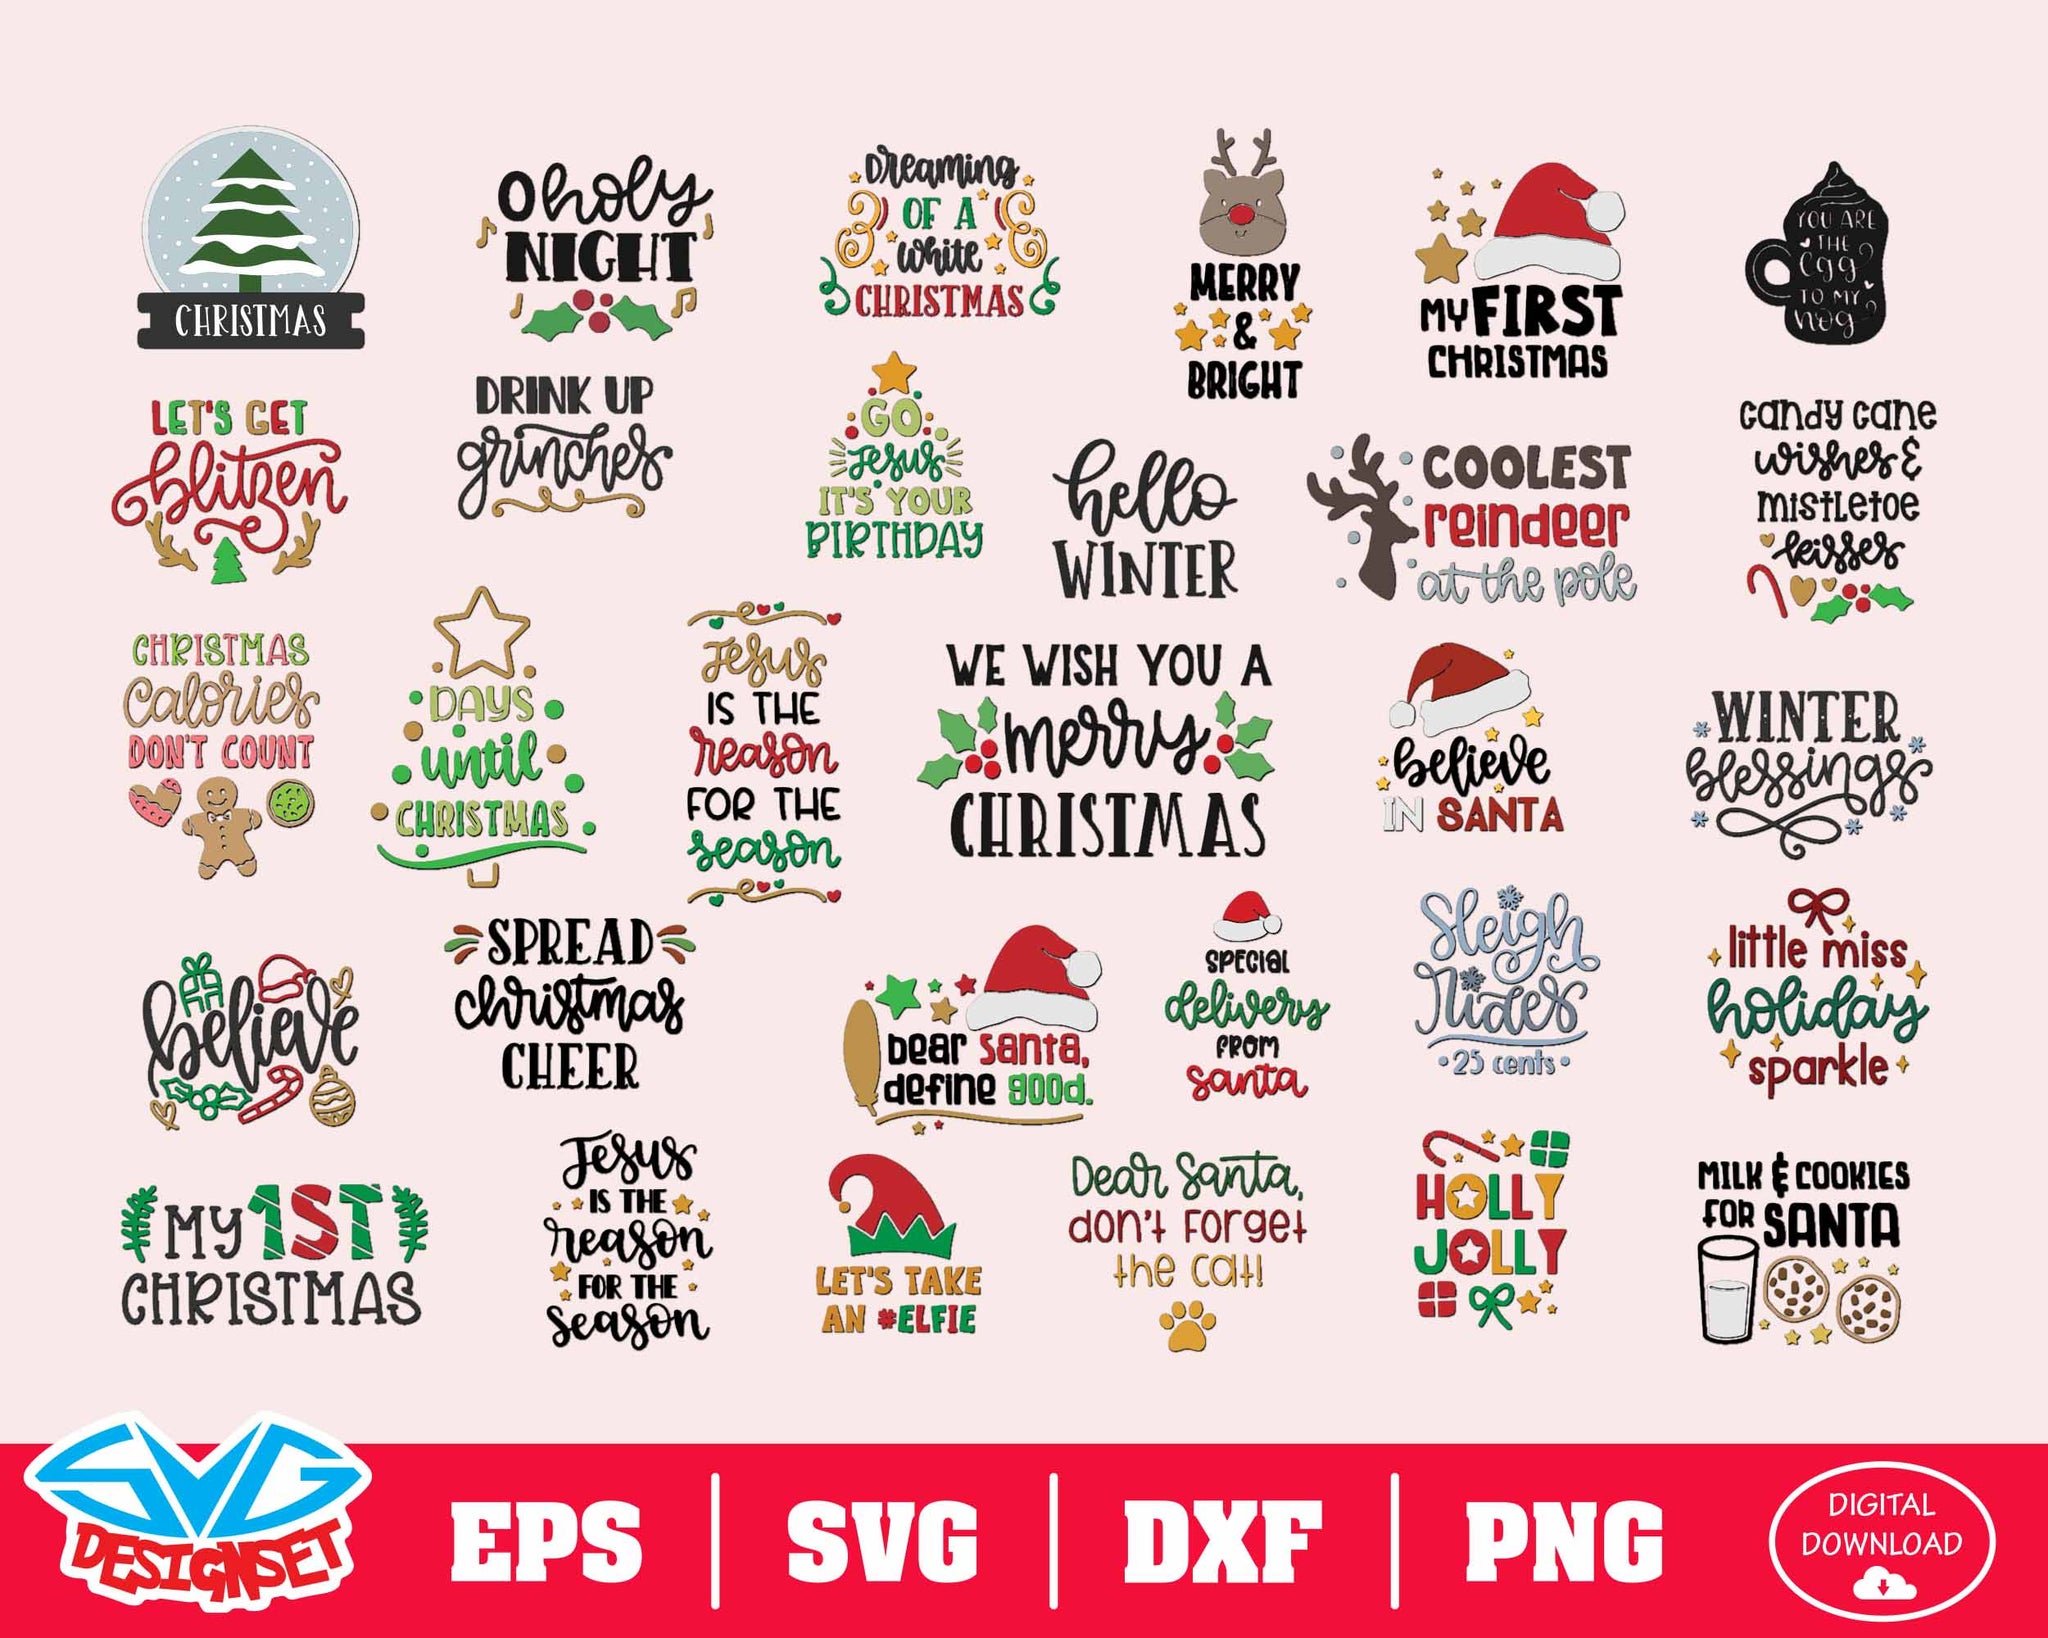 Christmas Bundle Svg, Dxf, Eps, Png, Clipart, Silhouette and Cutfiles #6 - SVGDesignSets